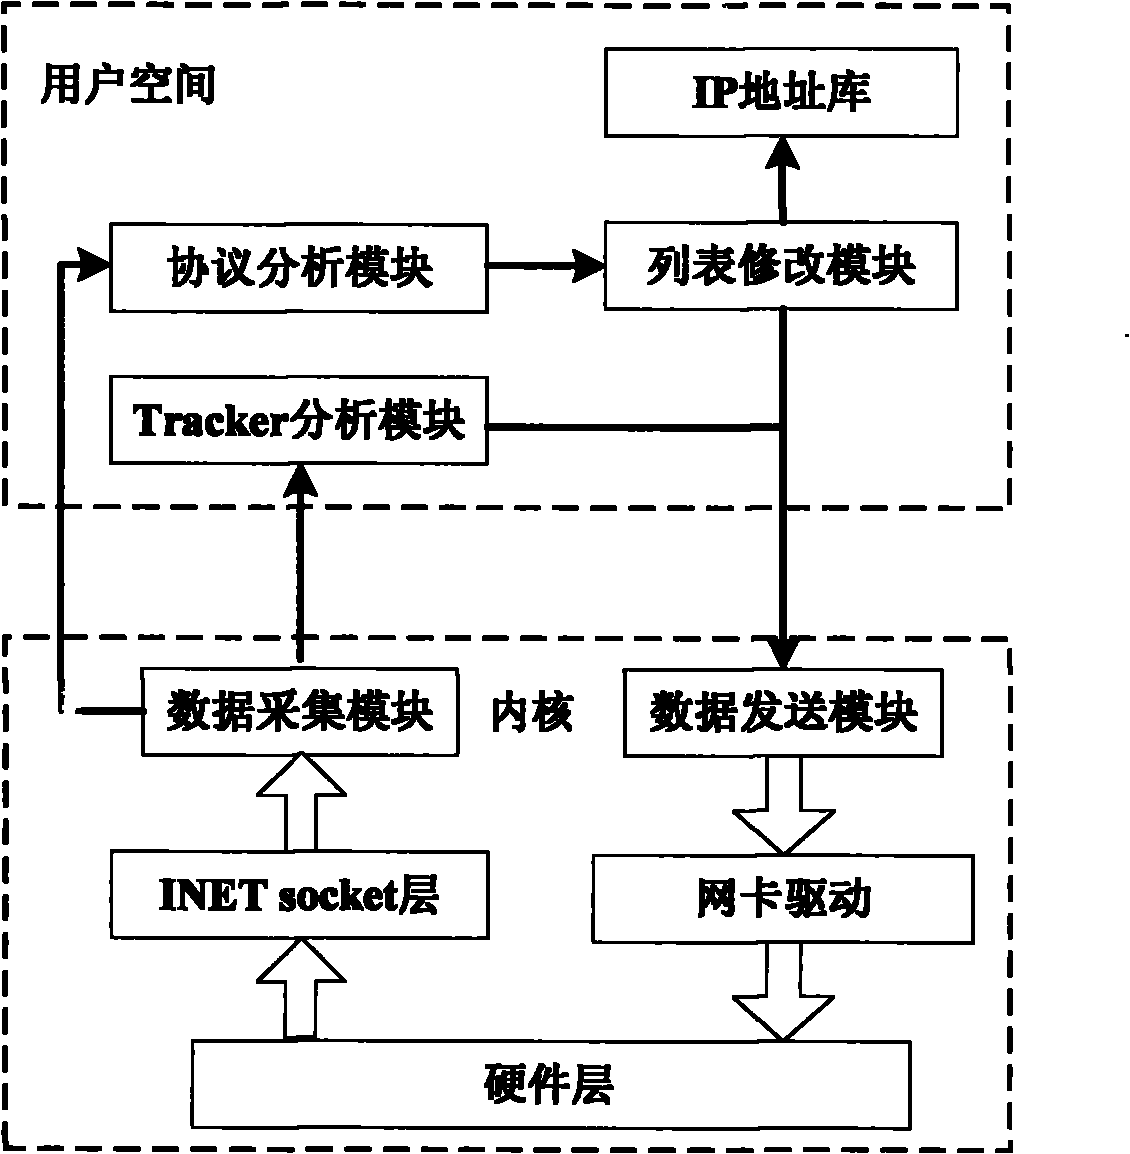 Peer-to-peer network flow traction system and method